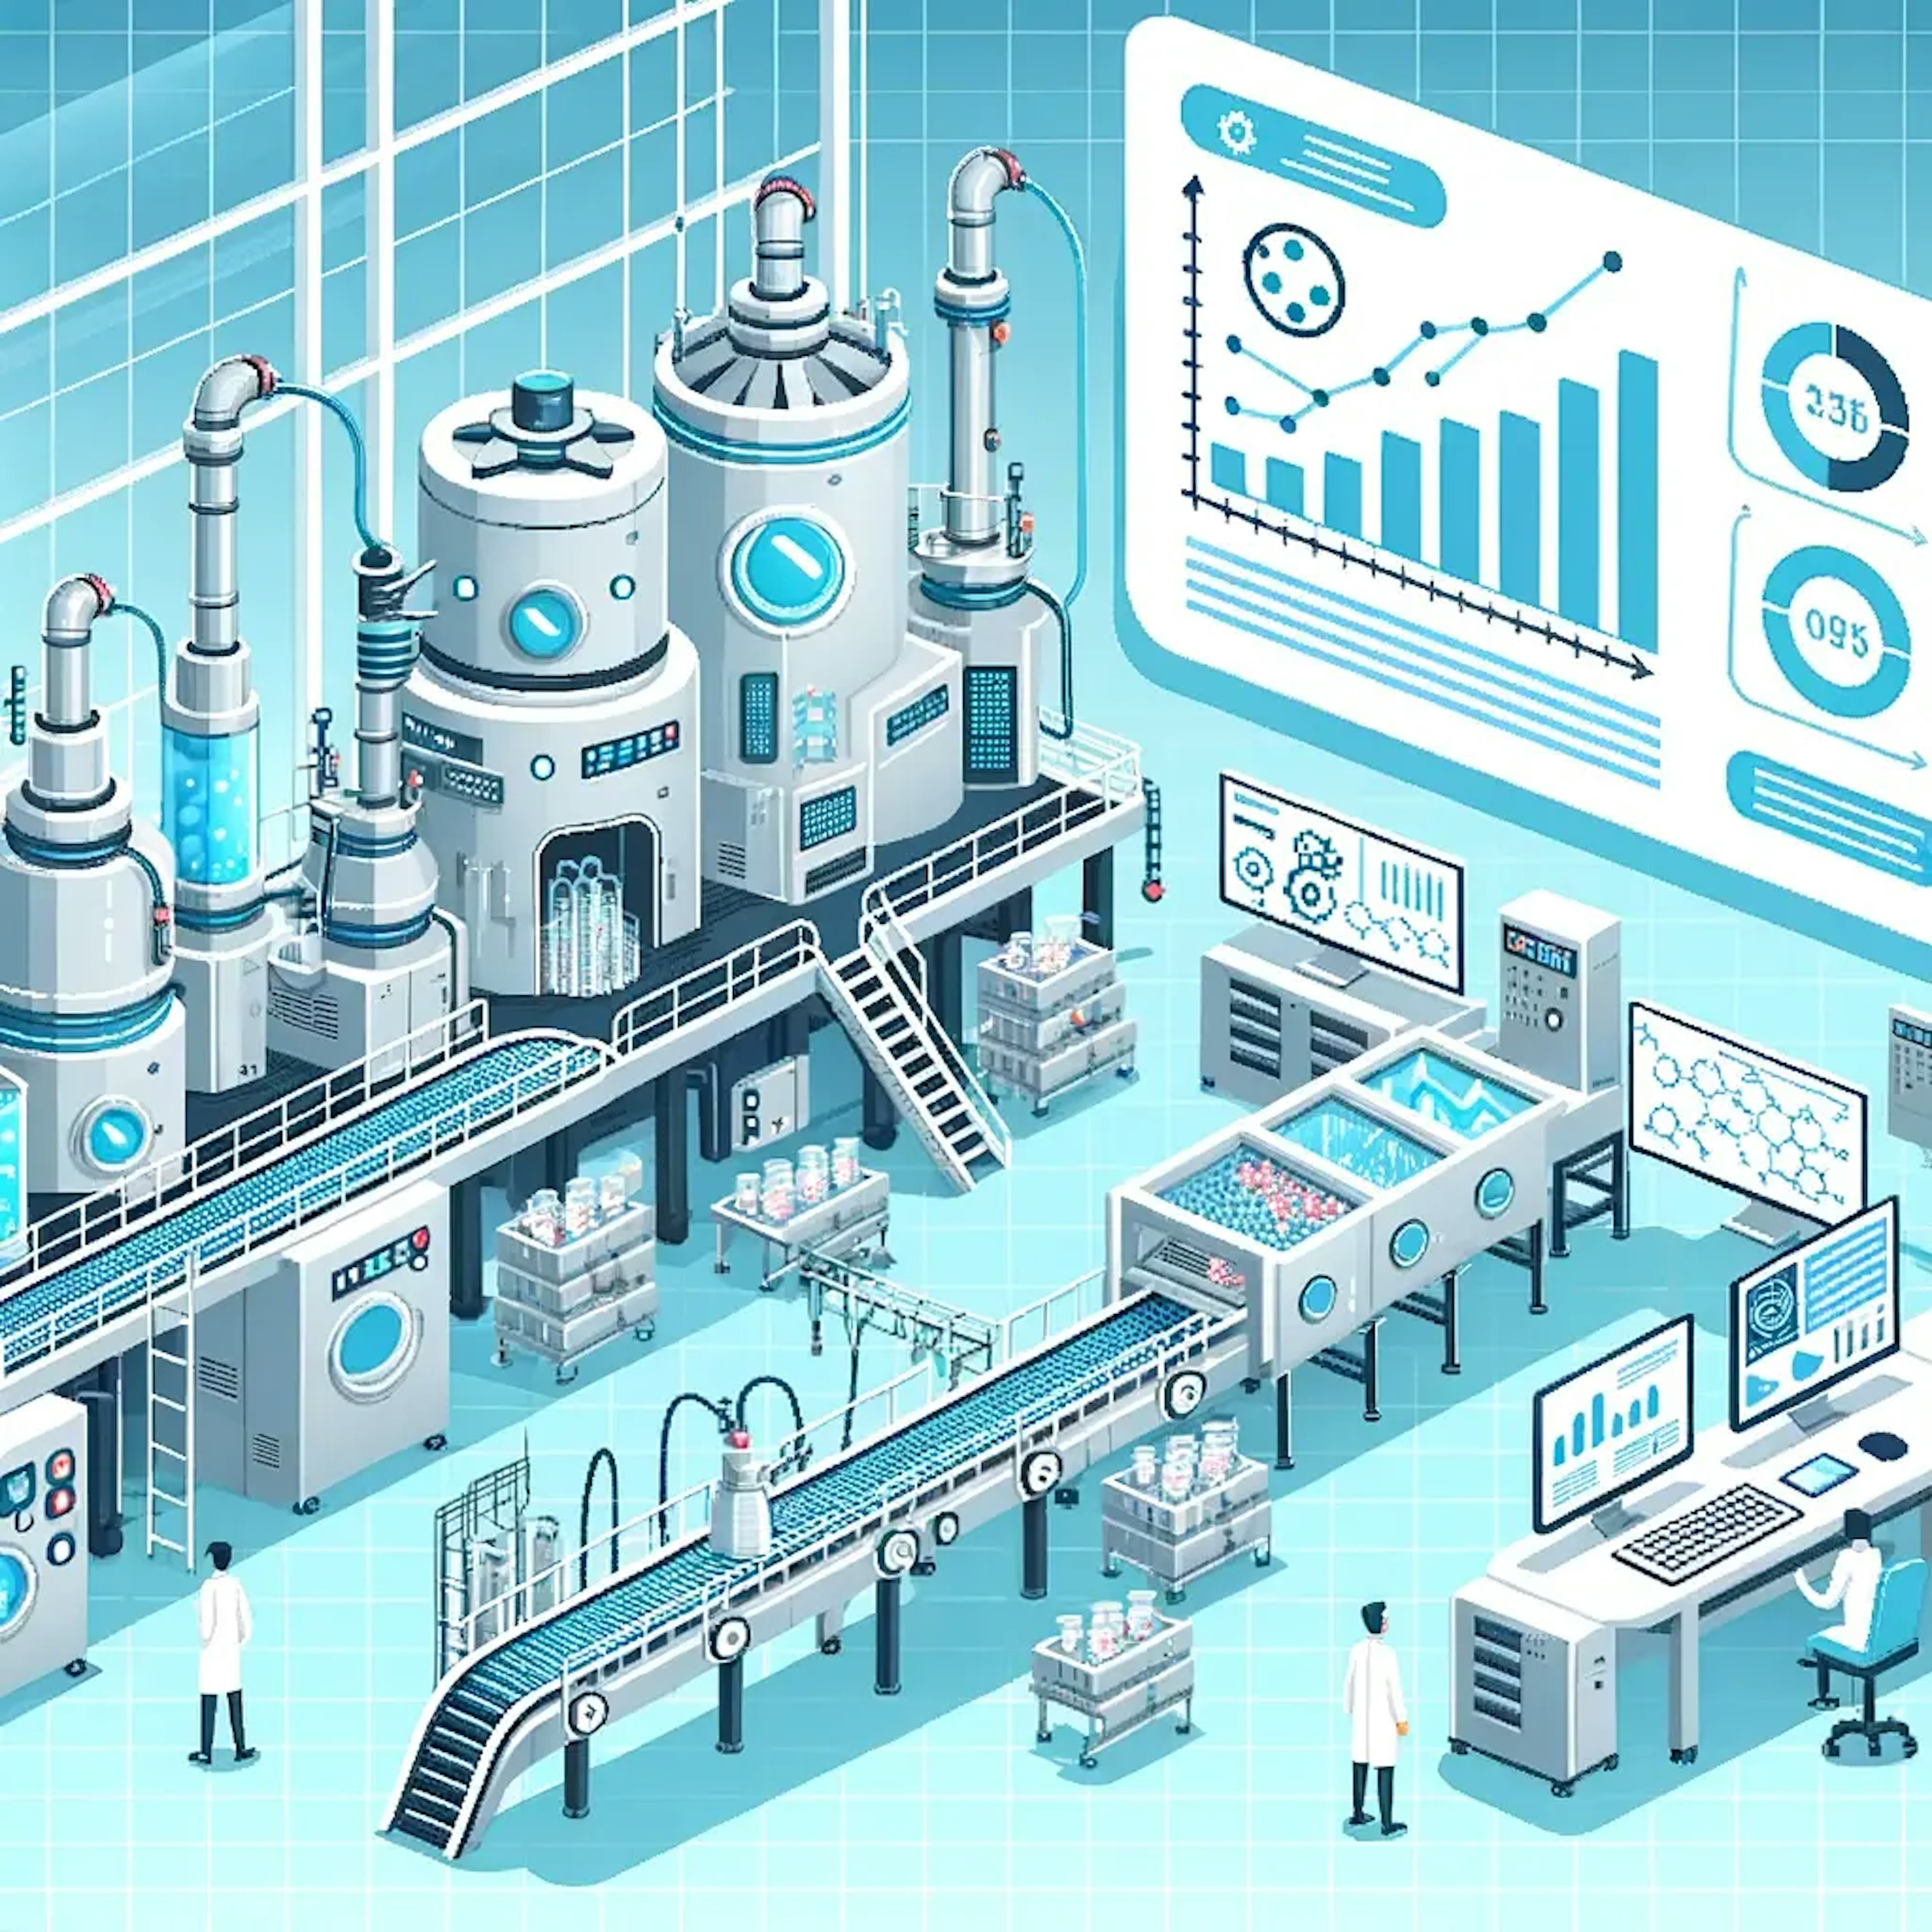 The Essential KPIs to Automate from Your EBR – Transform the Quality and Efficiency of Your Manufacturing